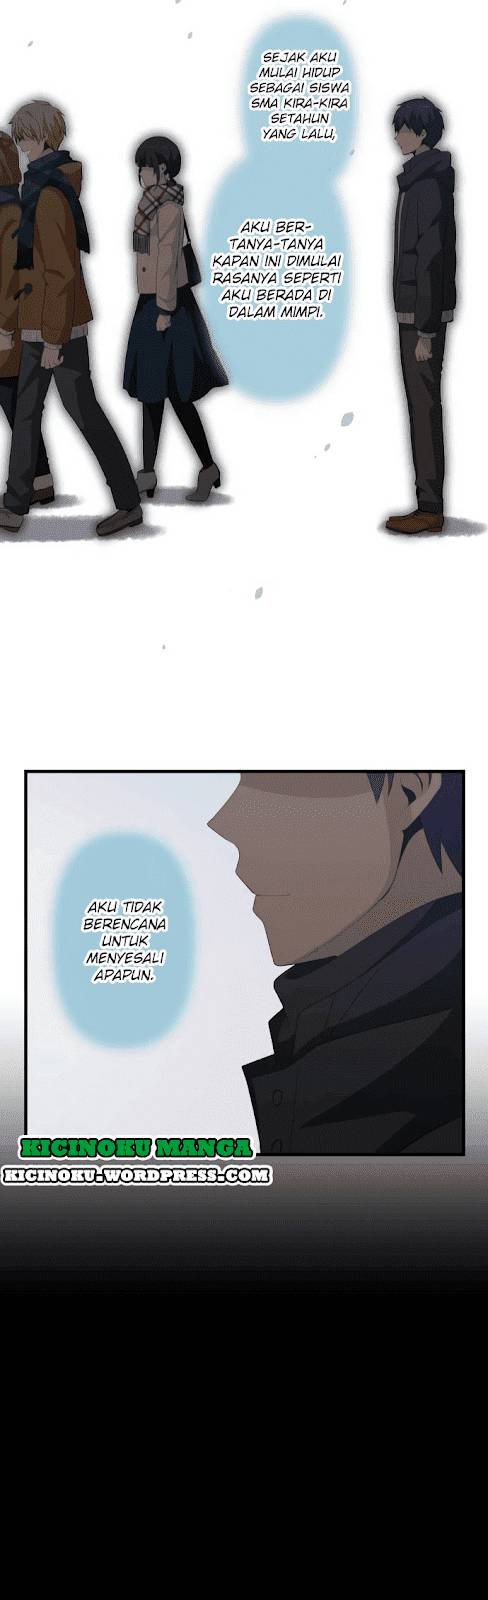 ReLife Chapter 202